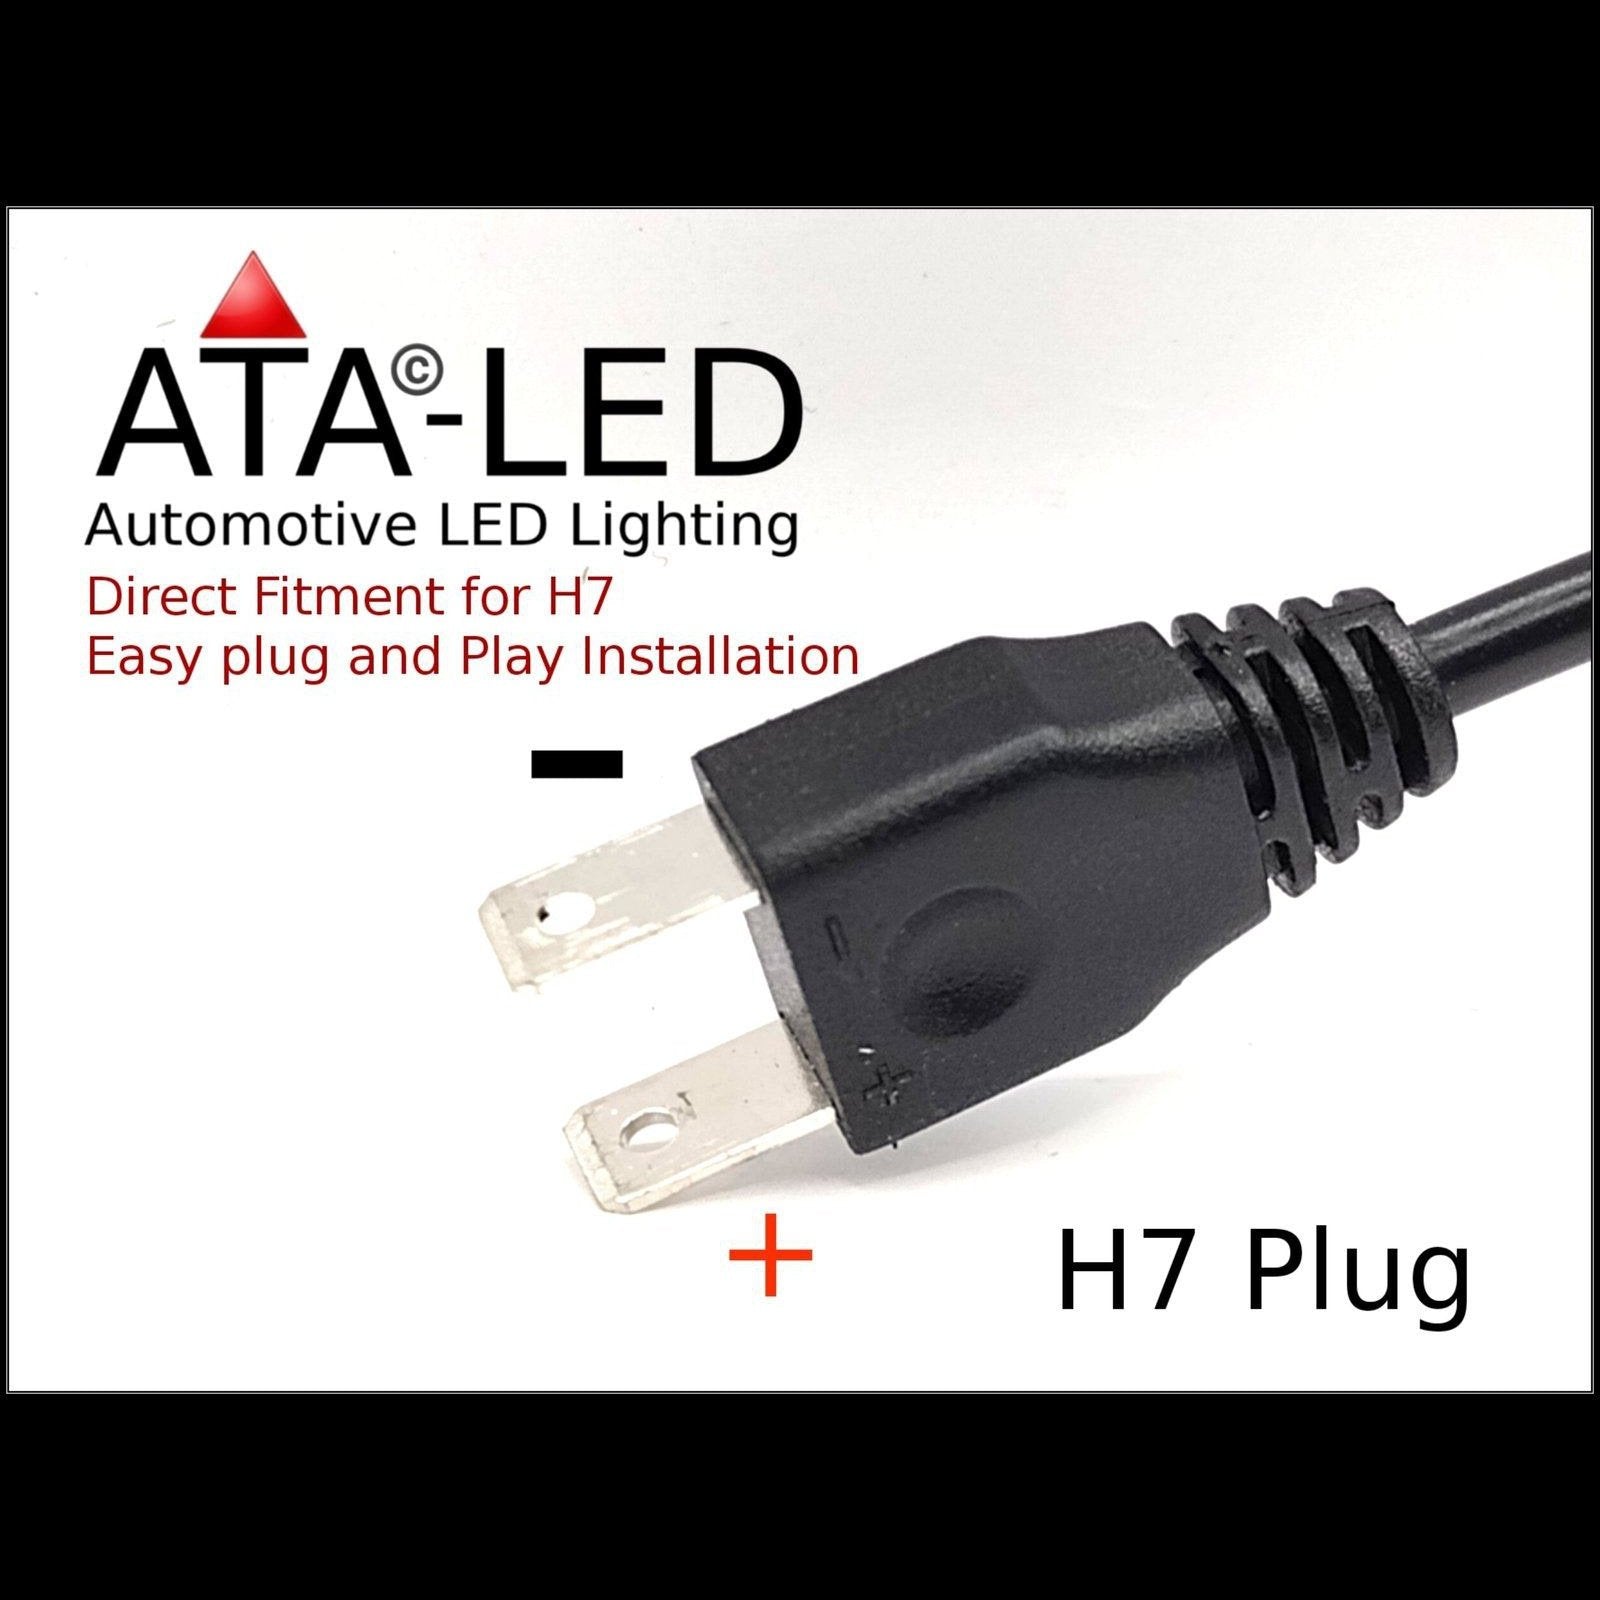 H7 Alpha 8 Direct Fitment for H7 Easy Plug and Play Installation